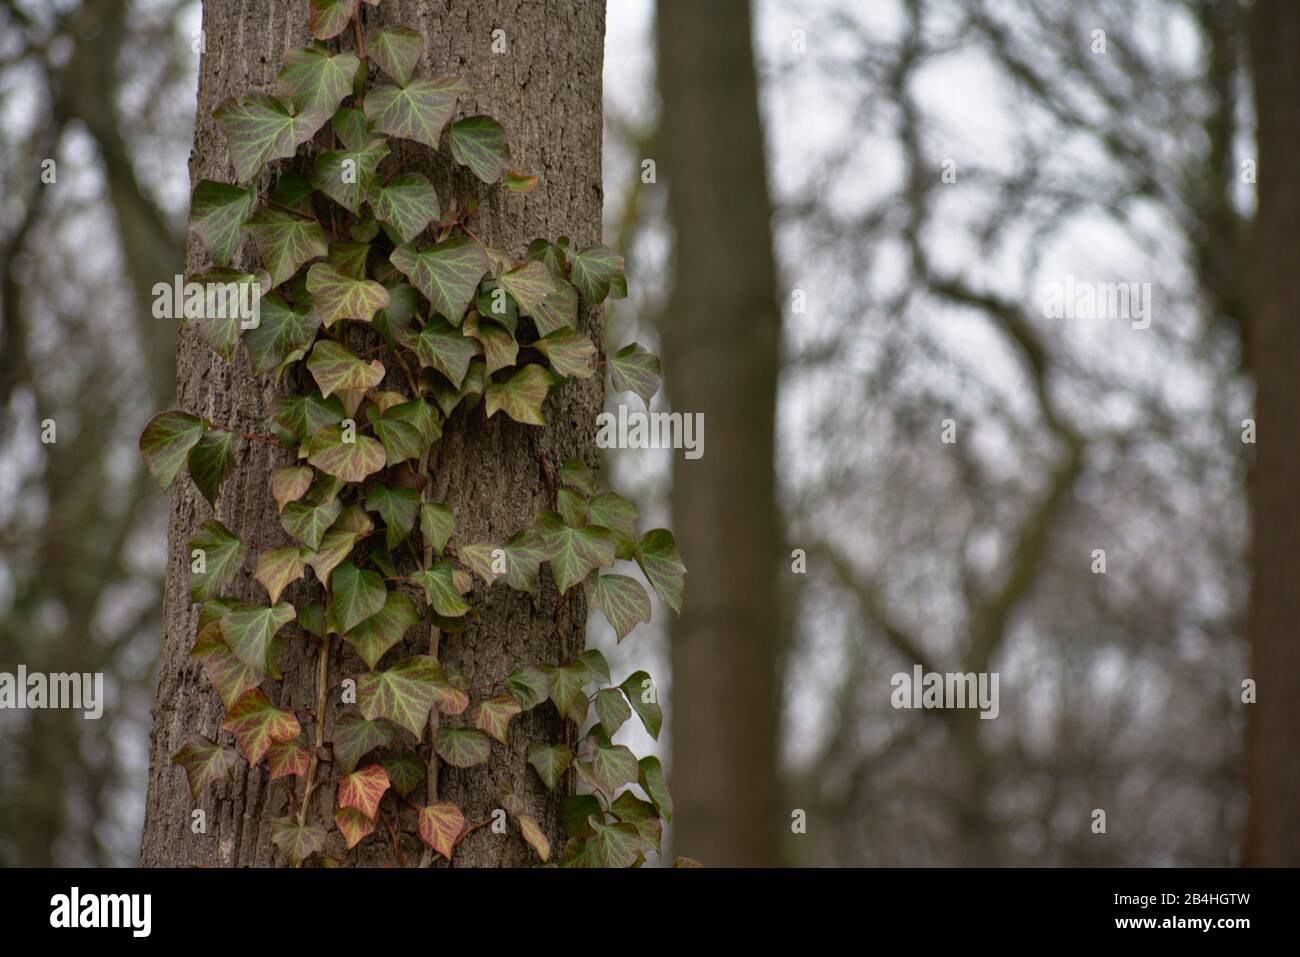 Weissensee Jewish Cemetery European ivy creeping up a tree in Berlin Stock Photo